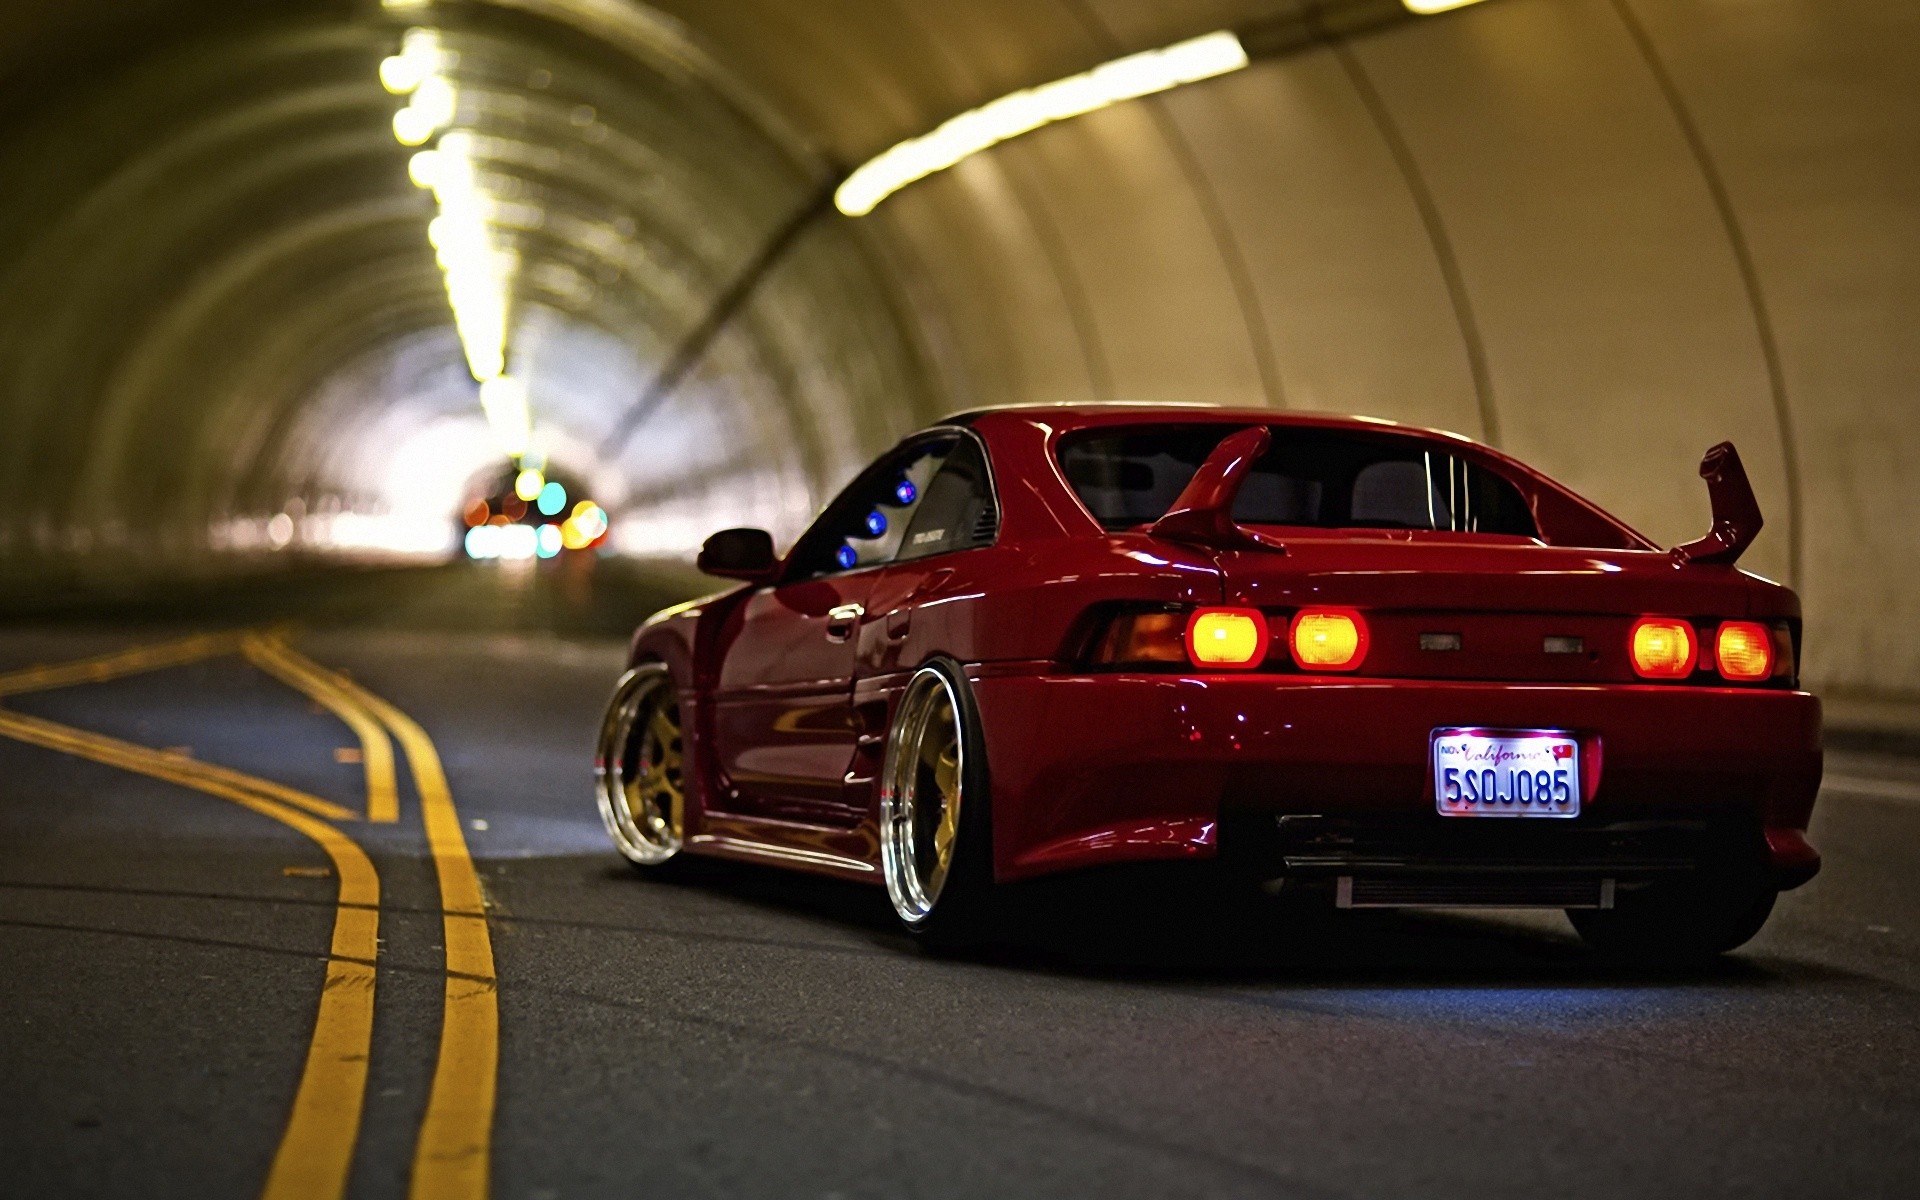 Free Download Integra Stance Wallpapers Acura Integra Stance Myspace Backgrounds 1920x1200 For Your Desktop Mobile Tablet Explore 50 Stance Wallpaper Stanced S2000 Wallpapers Stanced Car Wallpapers Stance Iphone Wallpapers